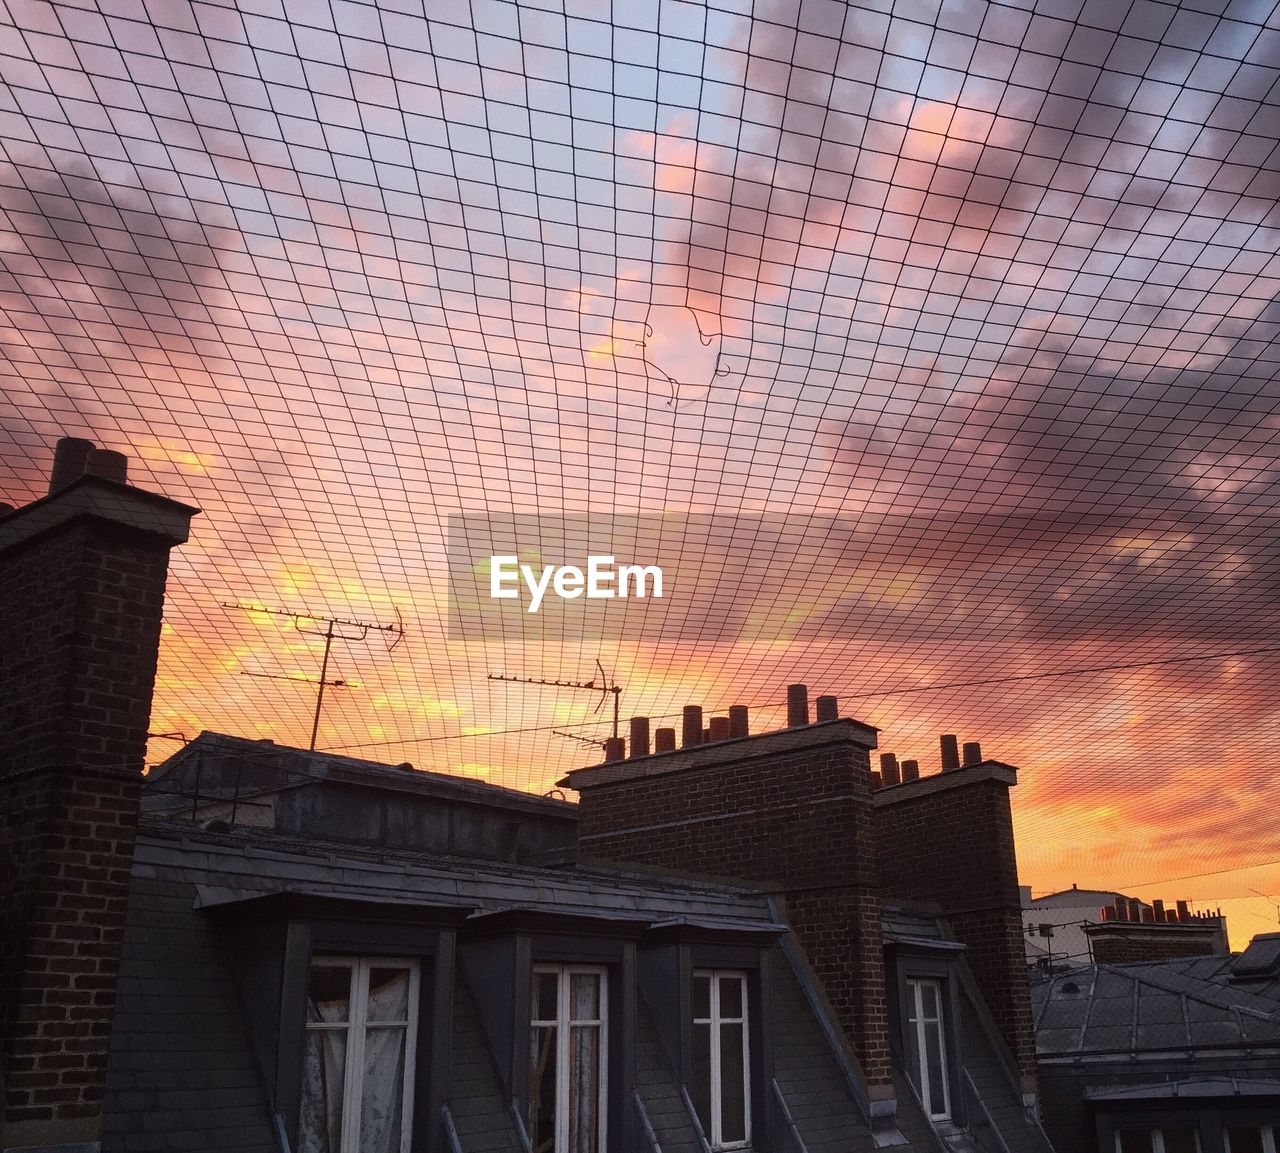 Low angle view of netting over house against sky during sunset